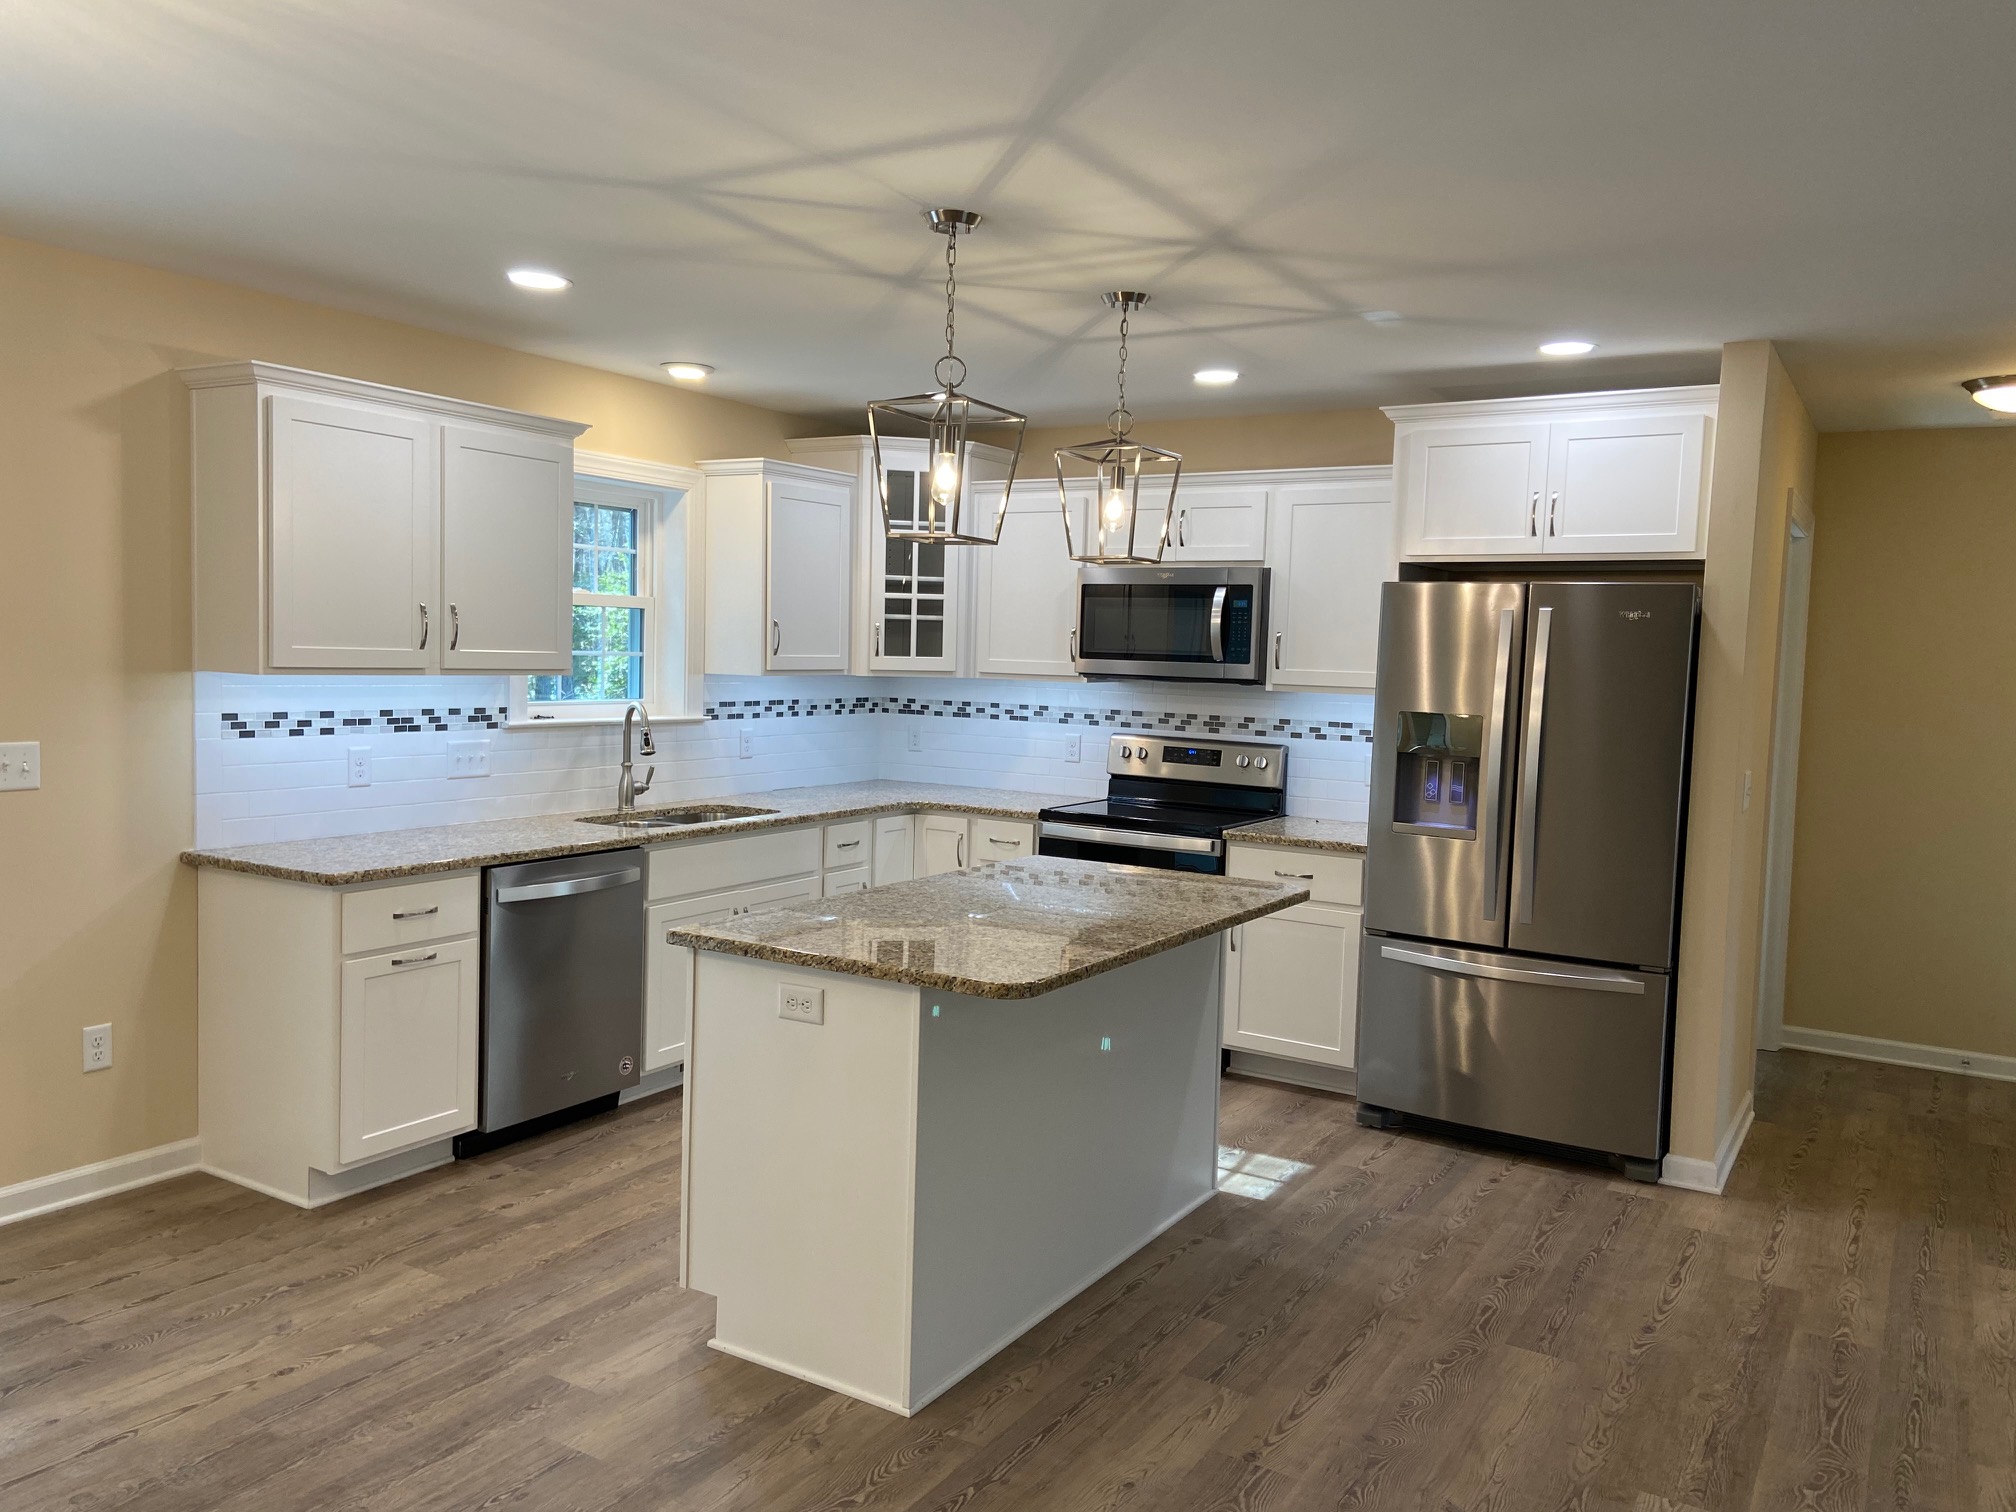 New Homes, Kitchen, Seely Homes, Delaware